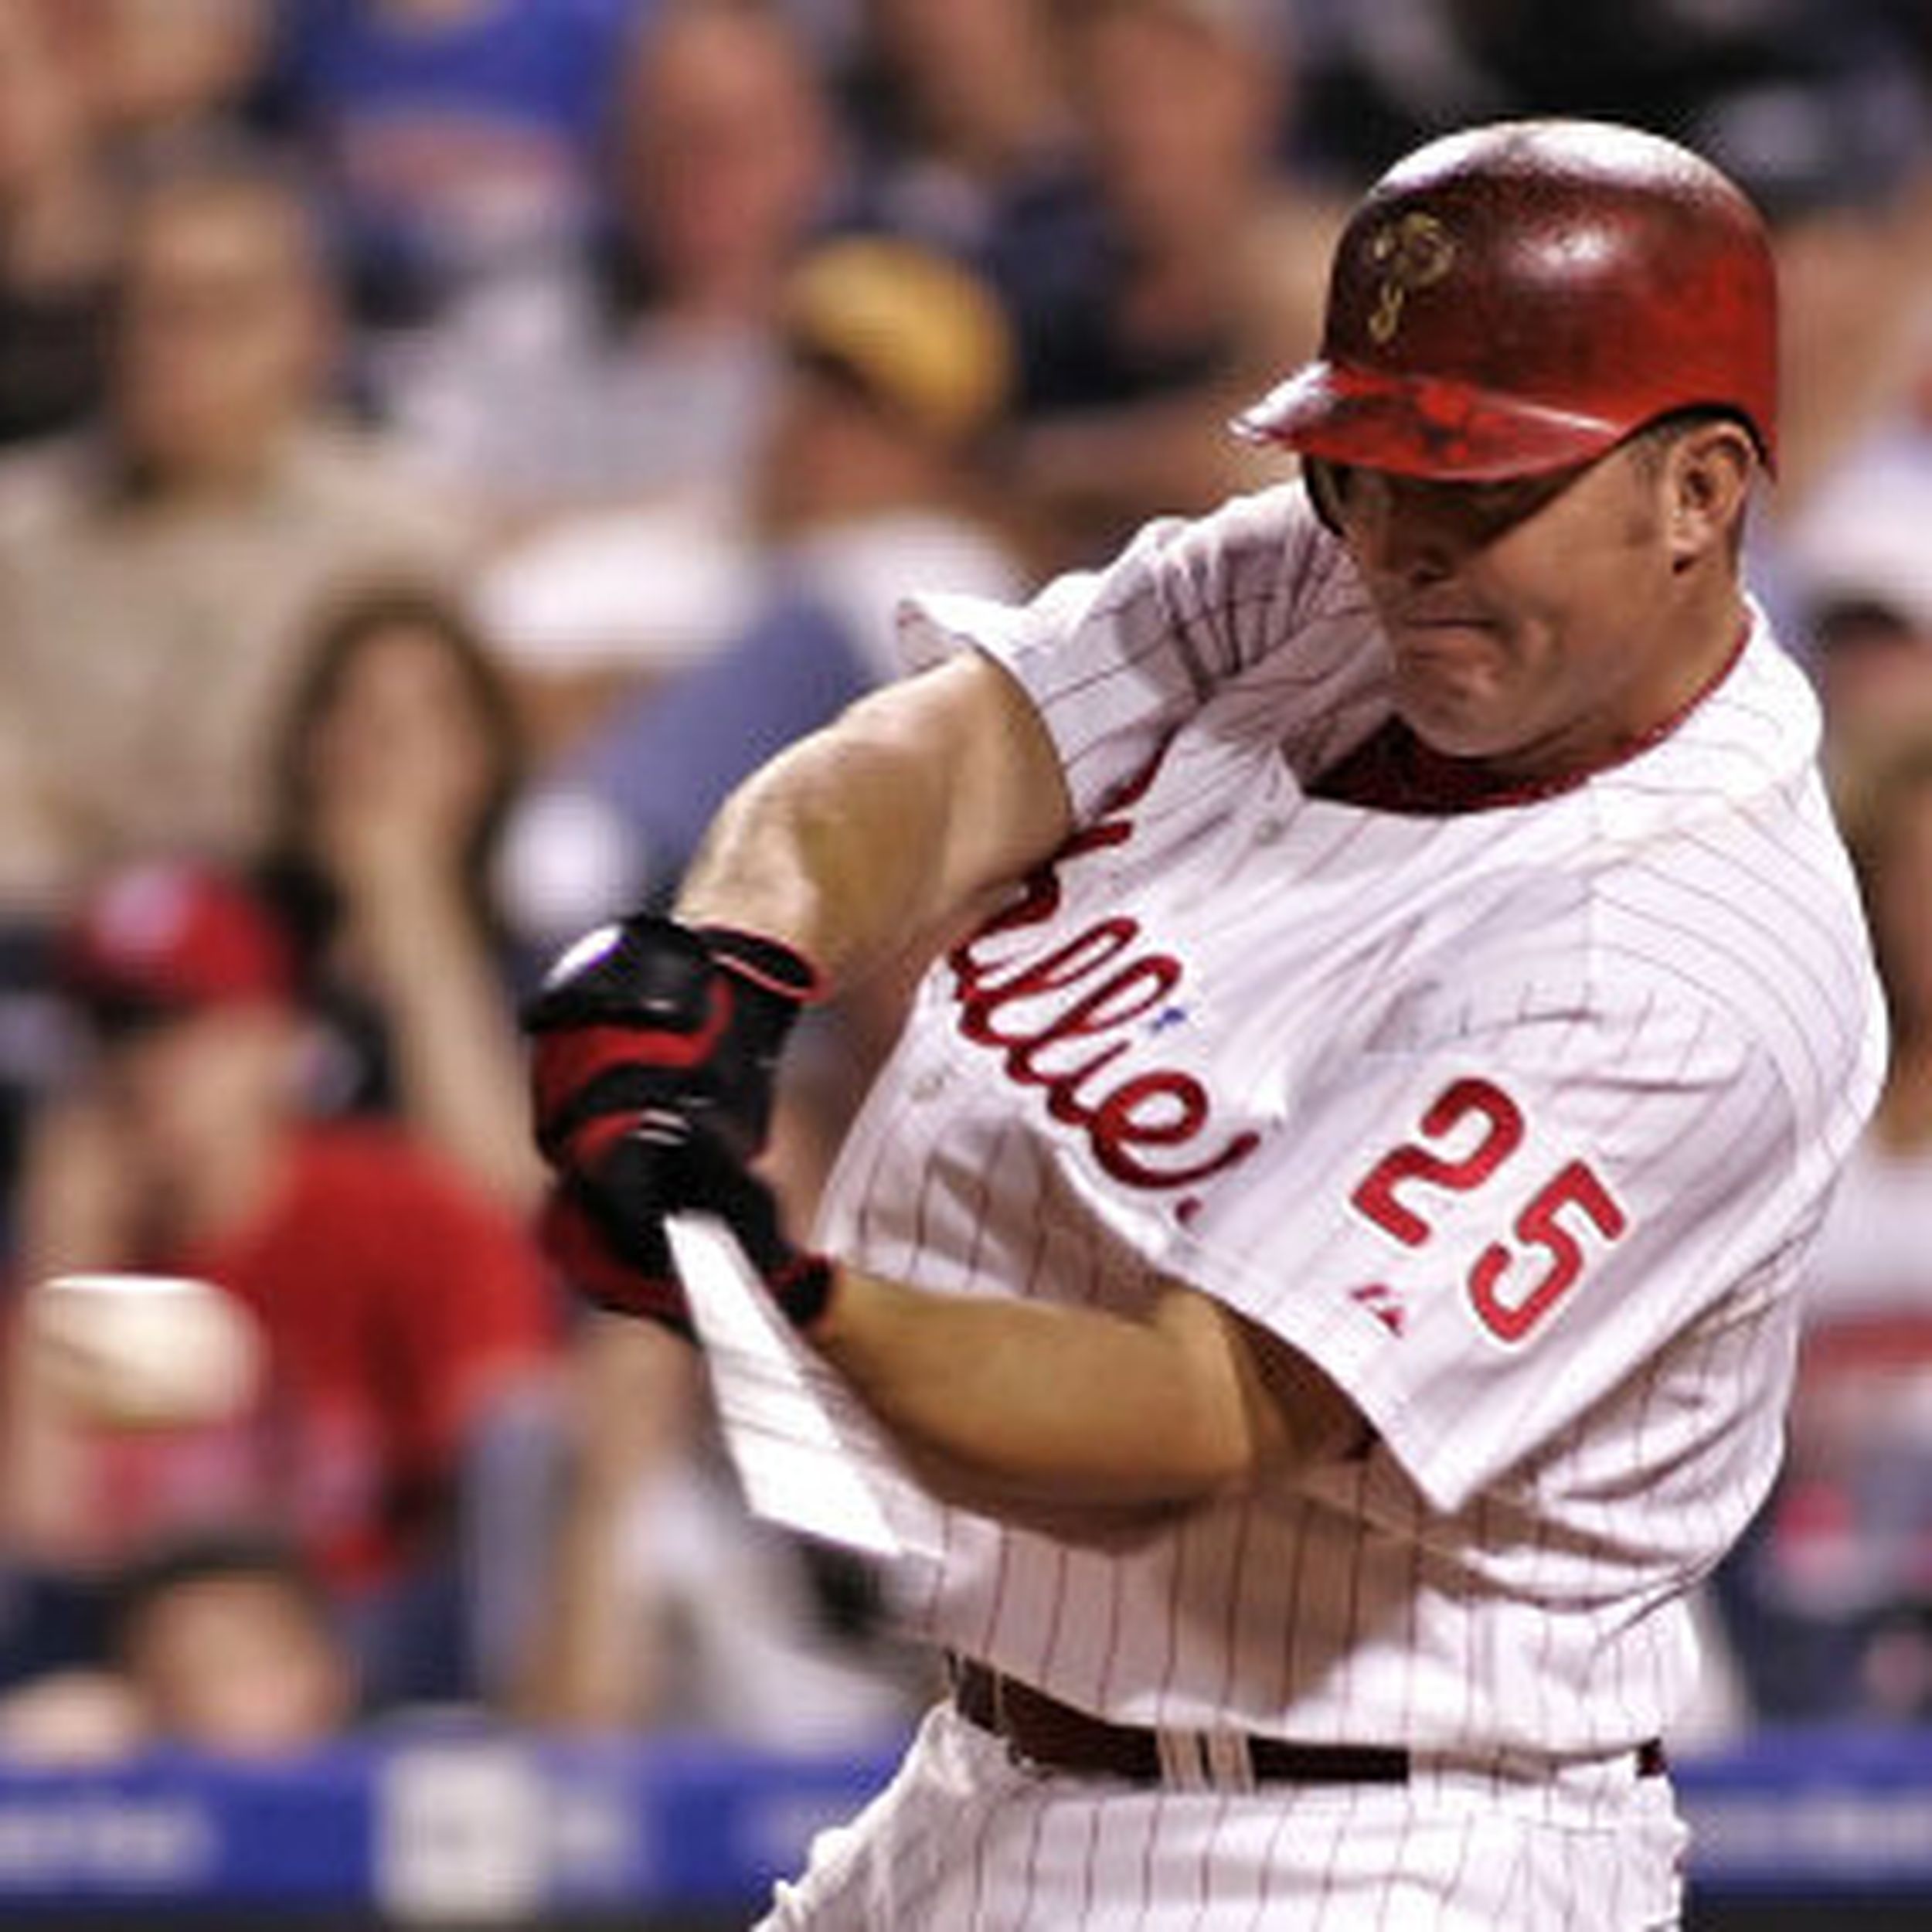 Should the White Sox hire Jim Thome as manager?